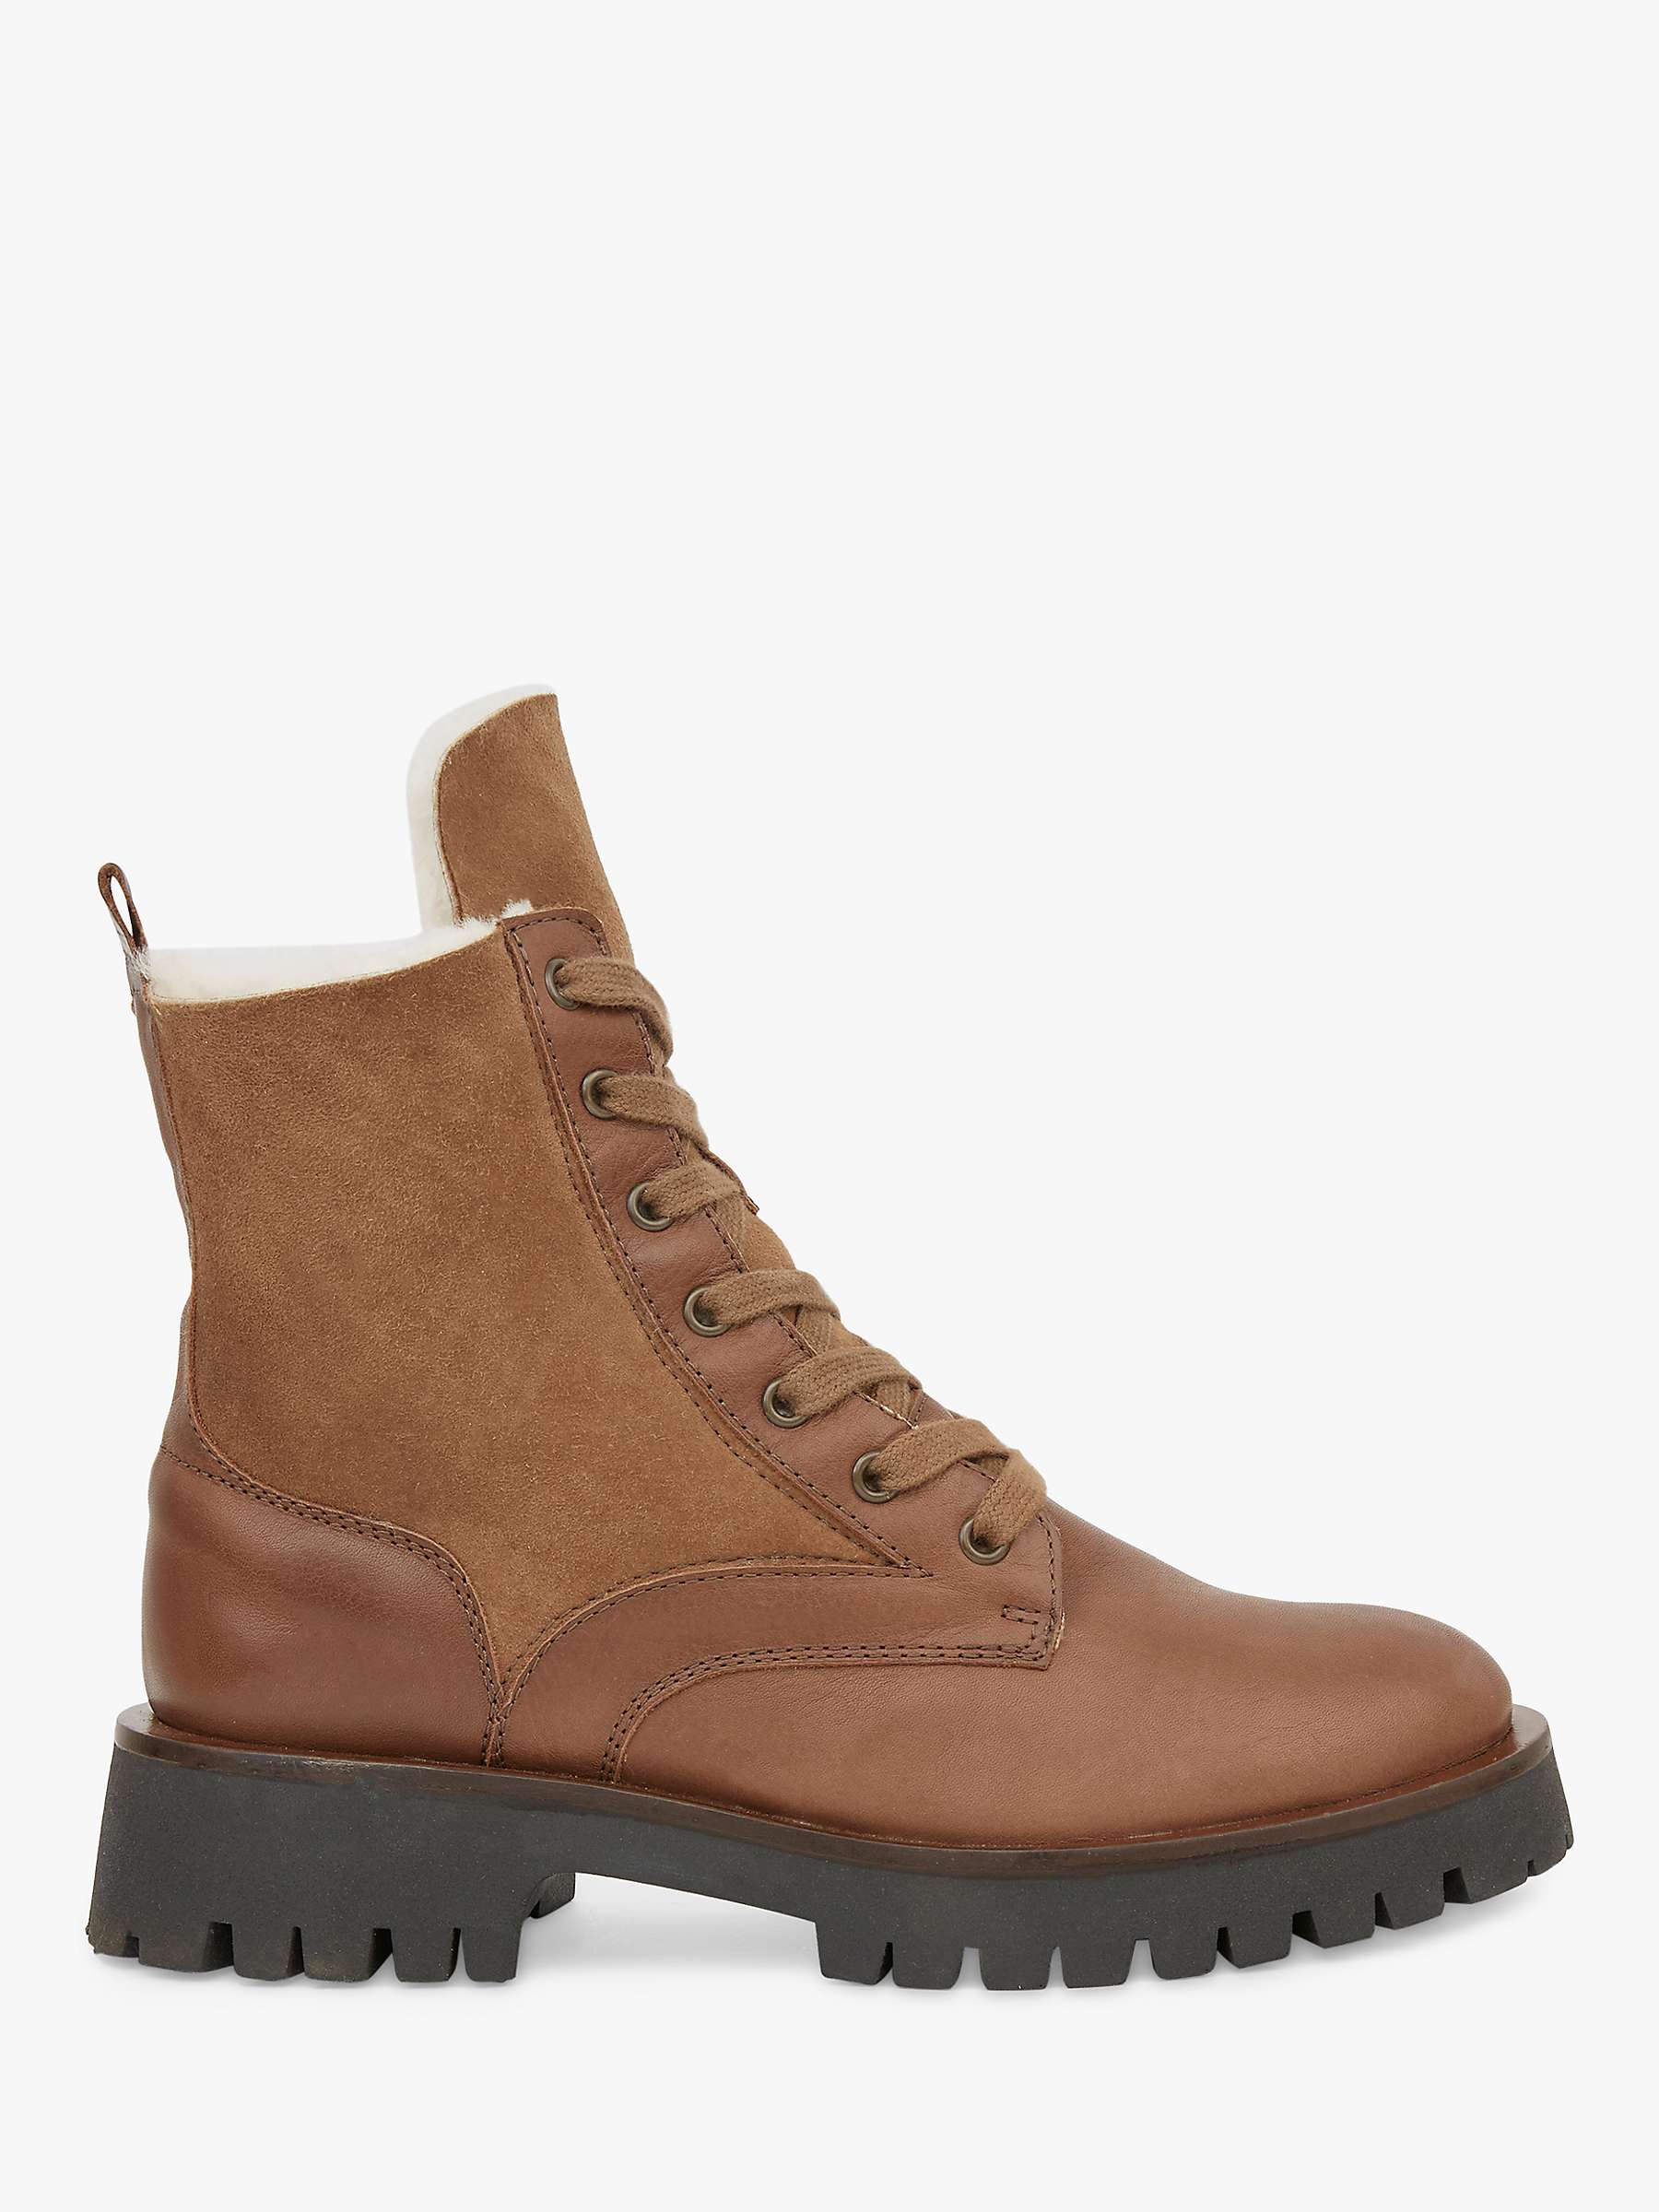 Buy Celtic & Co. Leather And Sheepskin Wool Lace Up Boots Online at johnlewis.com